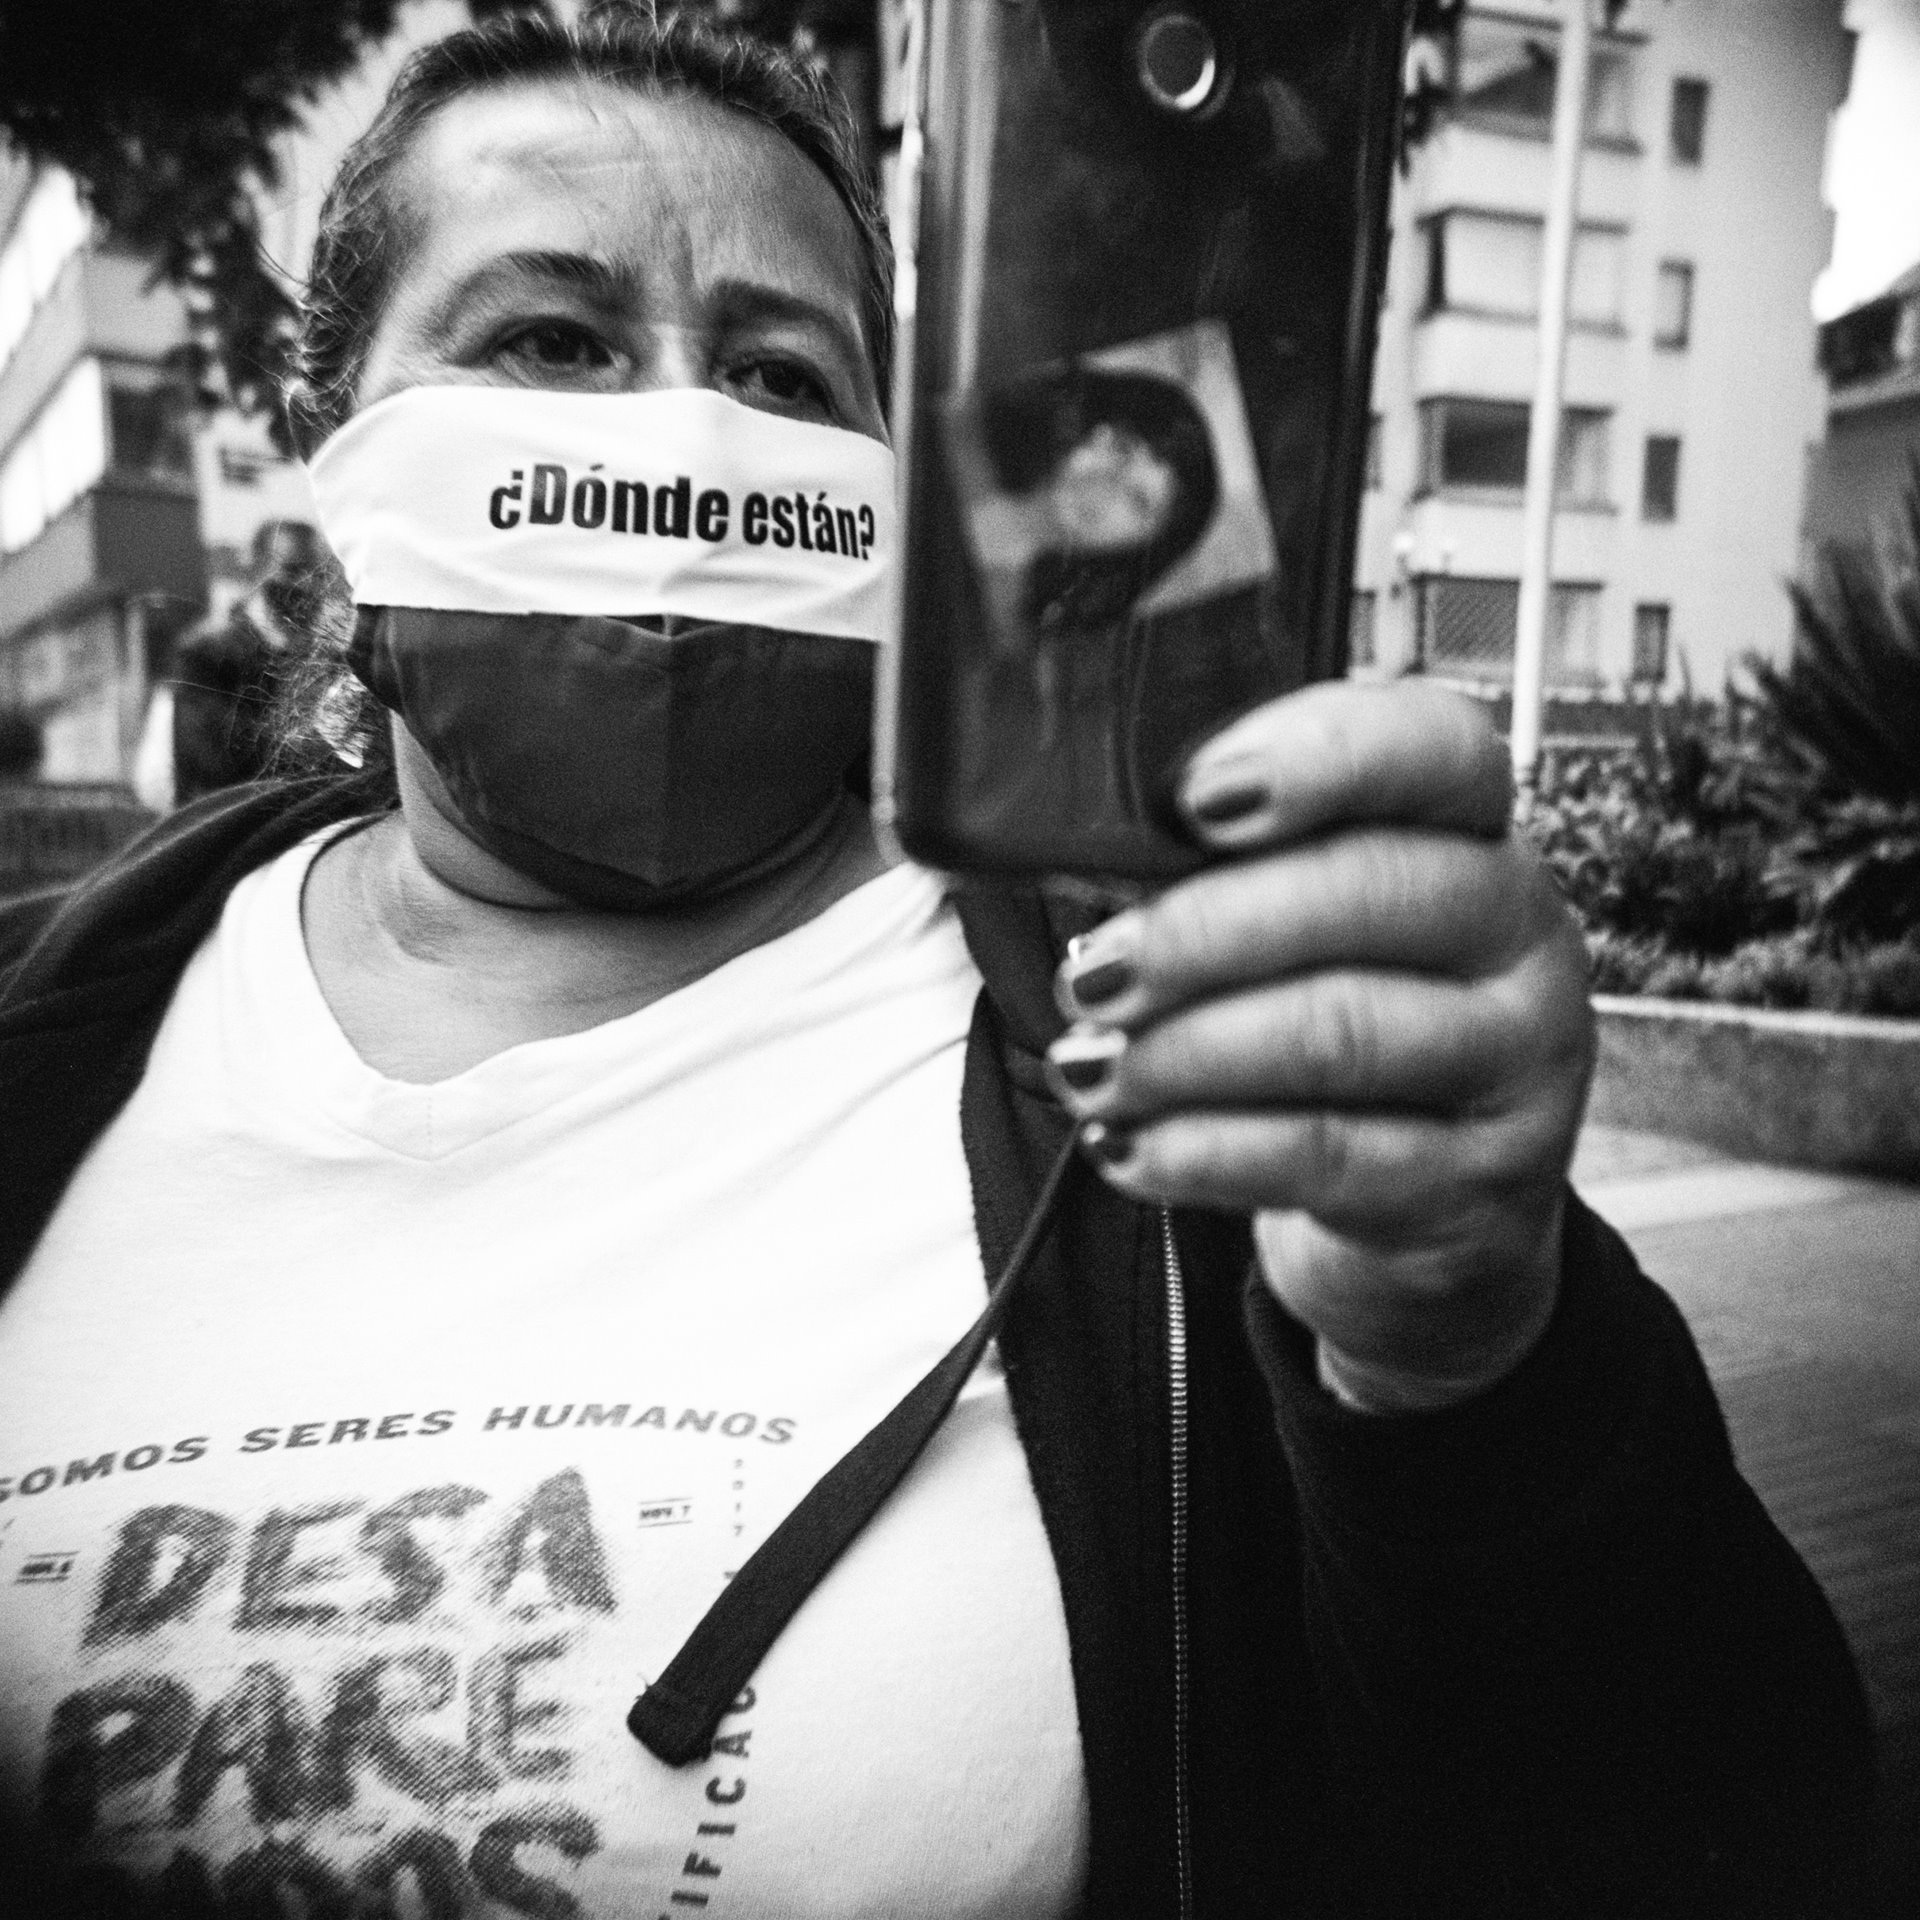 Inés Castiblanco, sister of Ana Rosa Castiblanco, records a video during a protest in front of the Special Jurisdiction for Peace (JEP) building in Bogotá, Colombia. &nbsp;She wears a mask bearing the question: &lsquo;Where are they?&rsquo; &nbsp;Ana Rosa, a kitchen assistant at the Palace of Justice, disappeared during the 1985 siege of the Palace, when she was 32 and pregnant. Her remains were returned to her family in 2017. The JEP was established in 2017 to investigate and try abuses committed during Colombia&rsquo;s internal conflict.